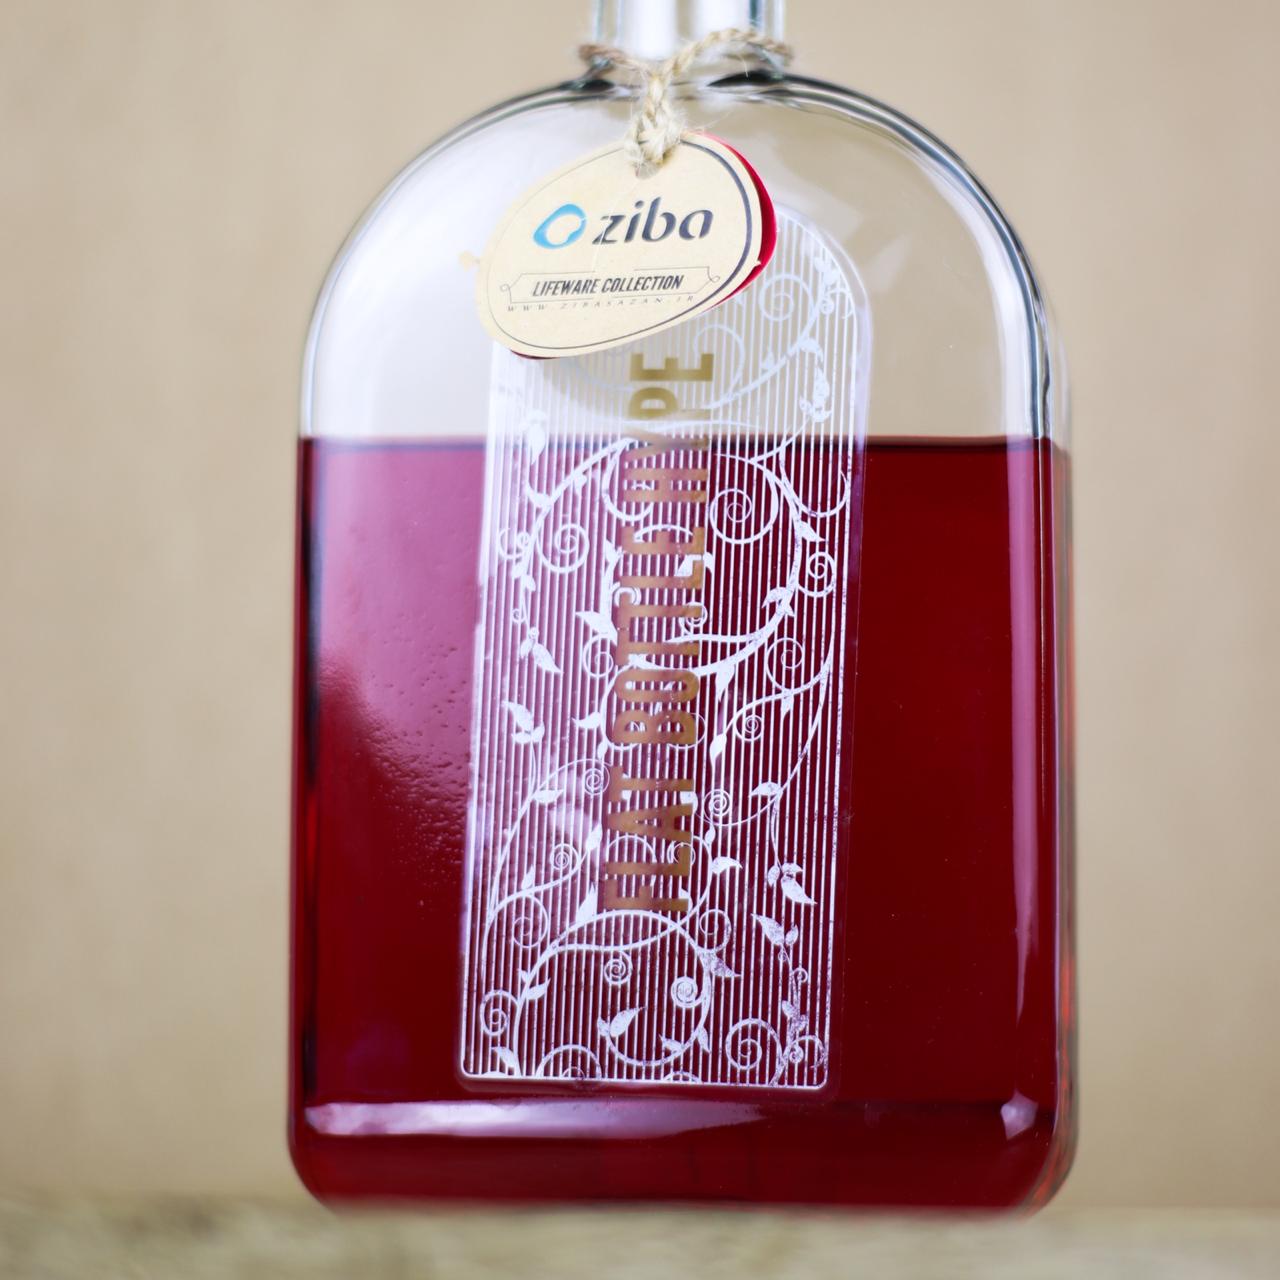 Rich Flat Bottle with Metal Lid - waseeh.com